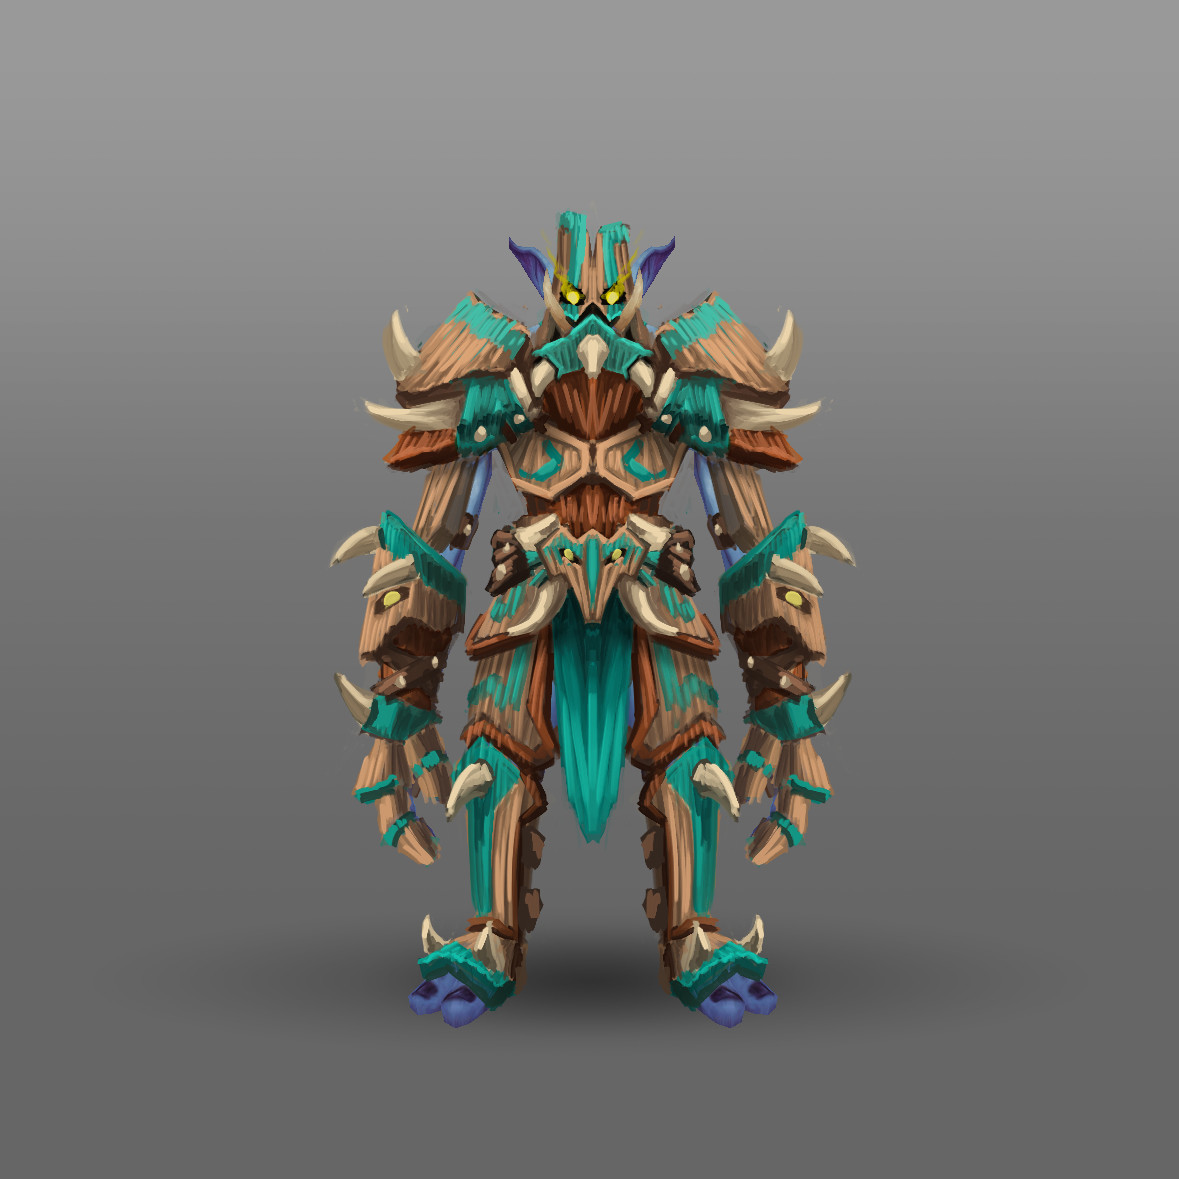 Warrior
For this set I wanted to explore a full set of armor made of wood inspired by the Spiritshield Mask helmet in Zul'aman